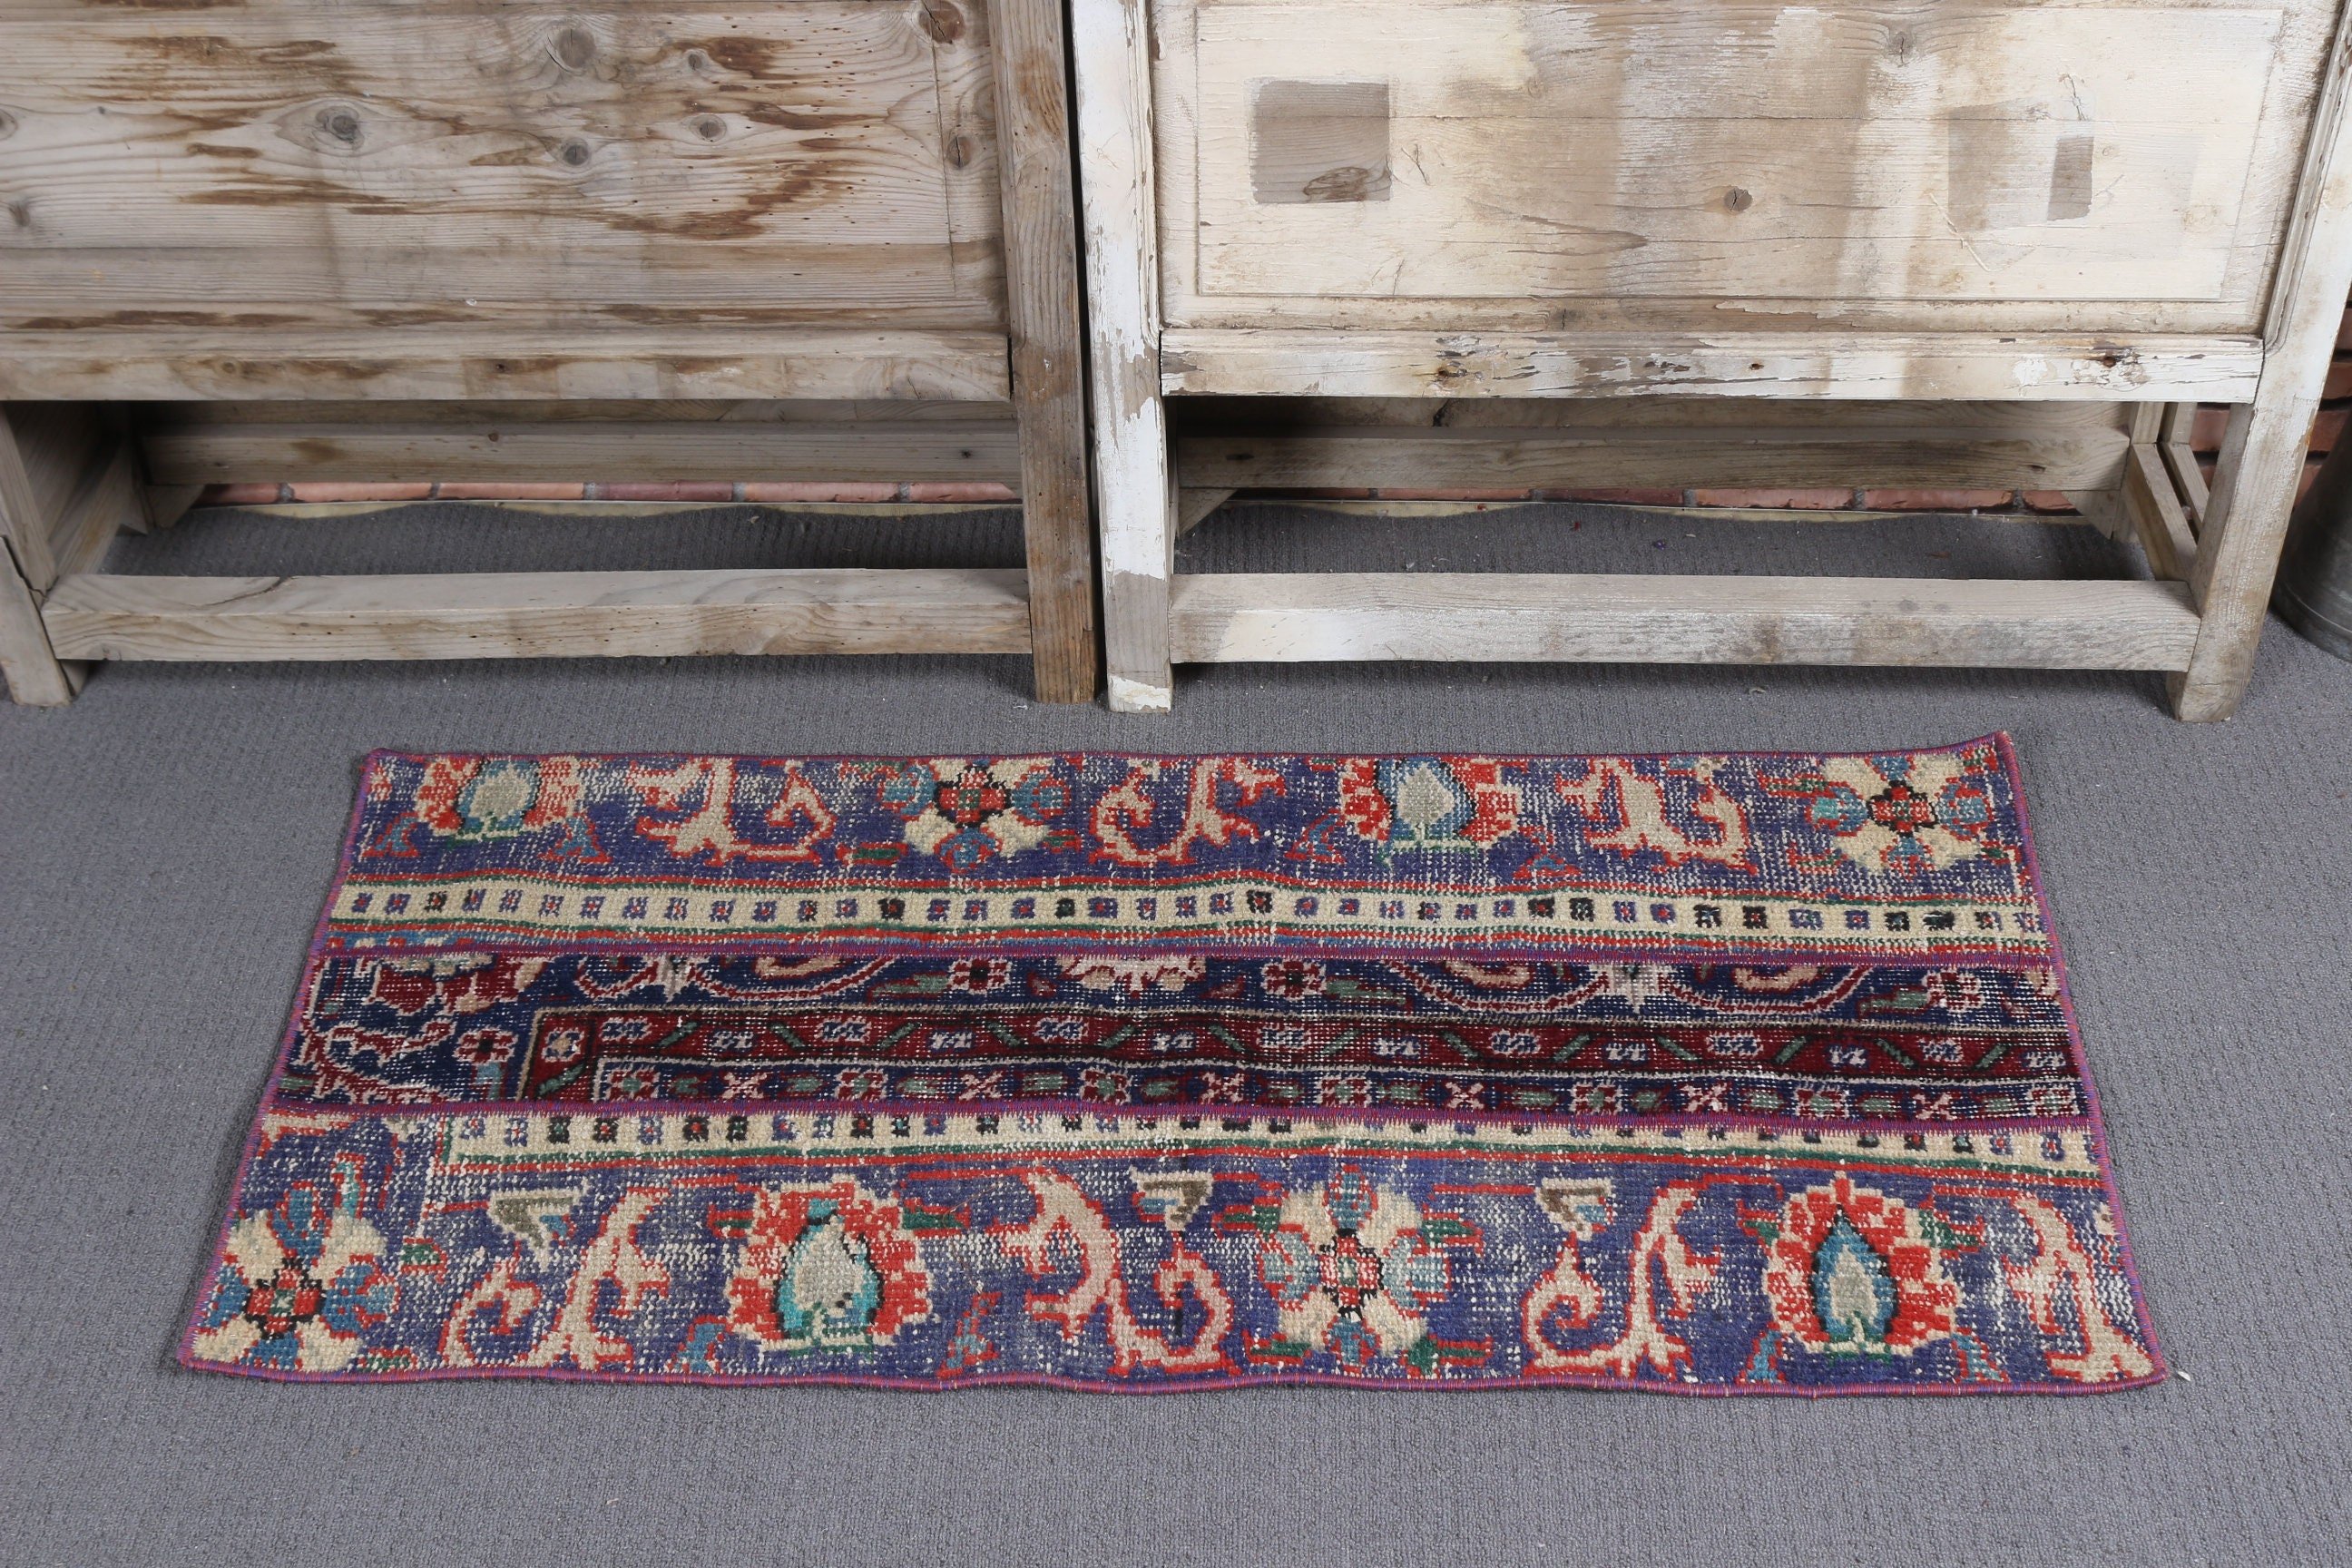 Entry Rugs, Wool Rug, 1.8x3.7 ft Small Rugs, Kitchen Rug, Rugs for Door Mat, Home Decor Rug, Vintage Rugs, Turkish Rugs, Blue Floor Rug